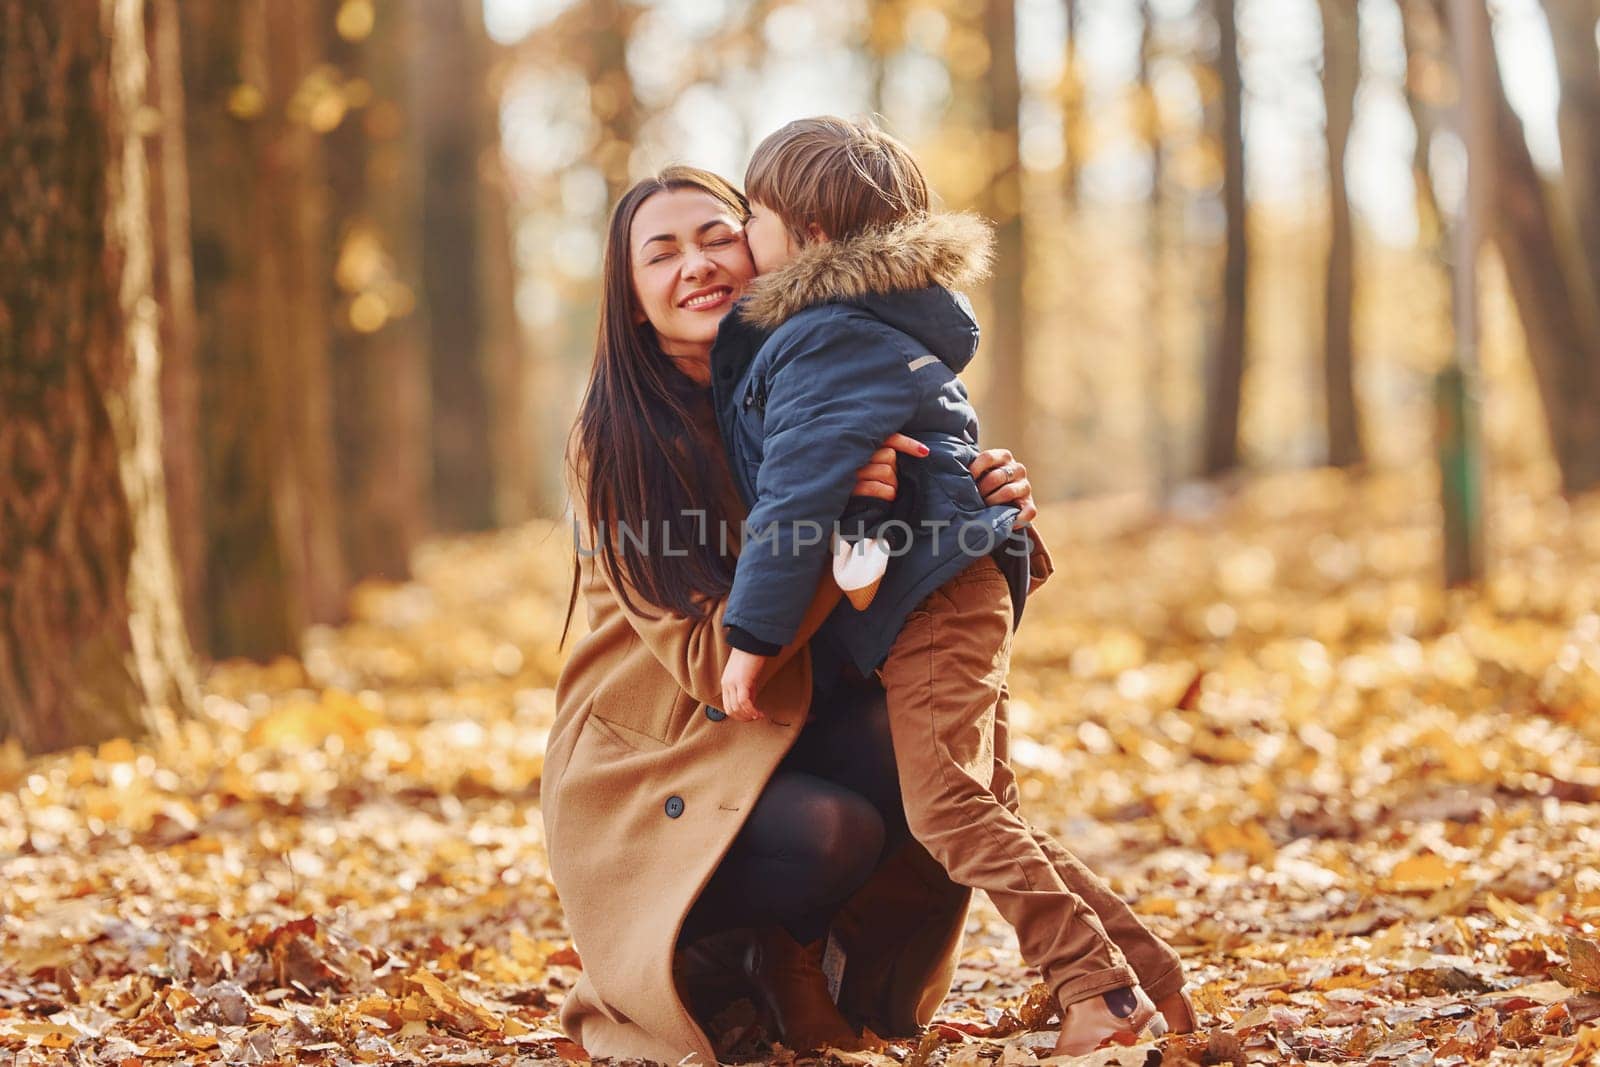 Active weekend time spending. Mother with her son is having fun outdoors in the autumn forest by Standret